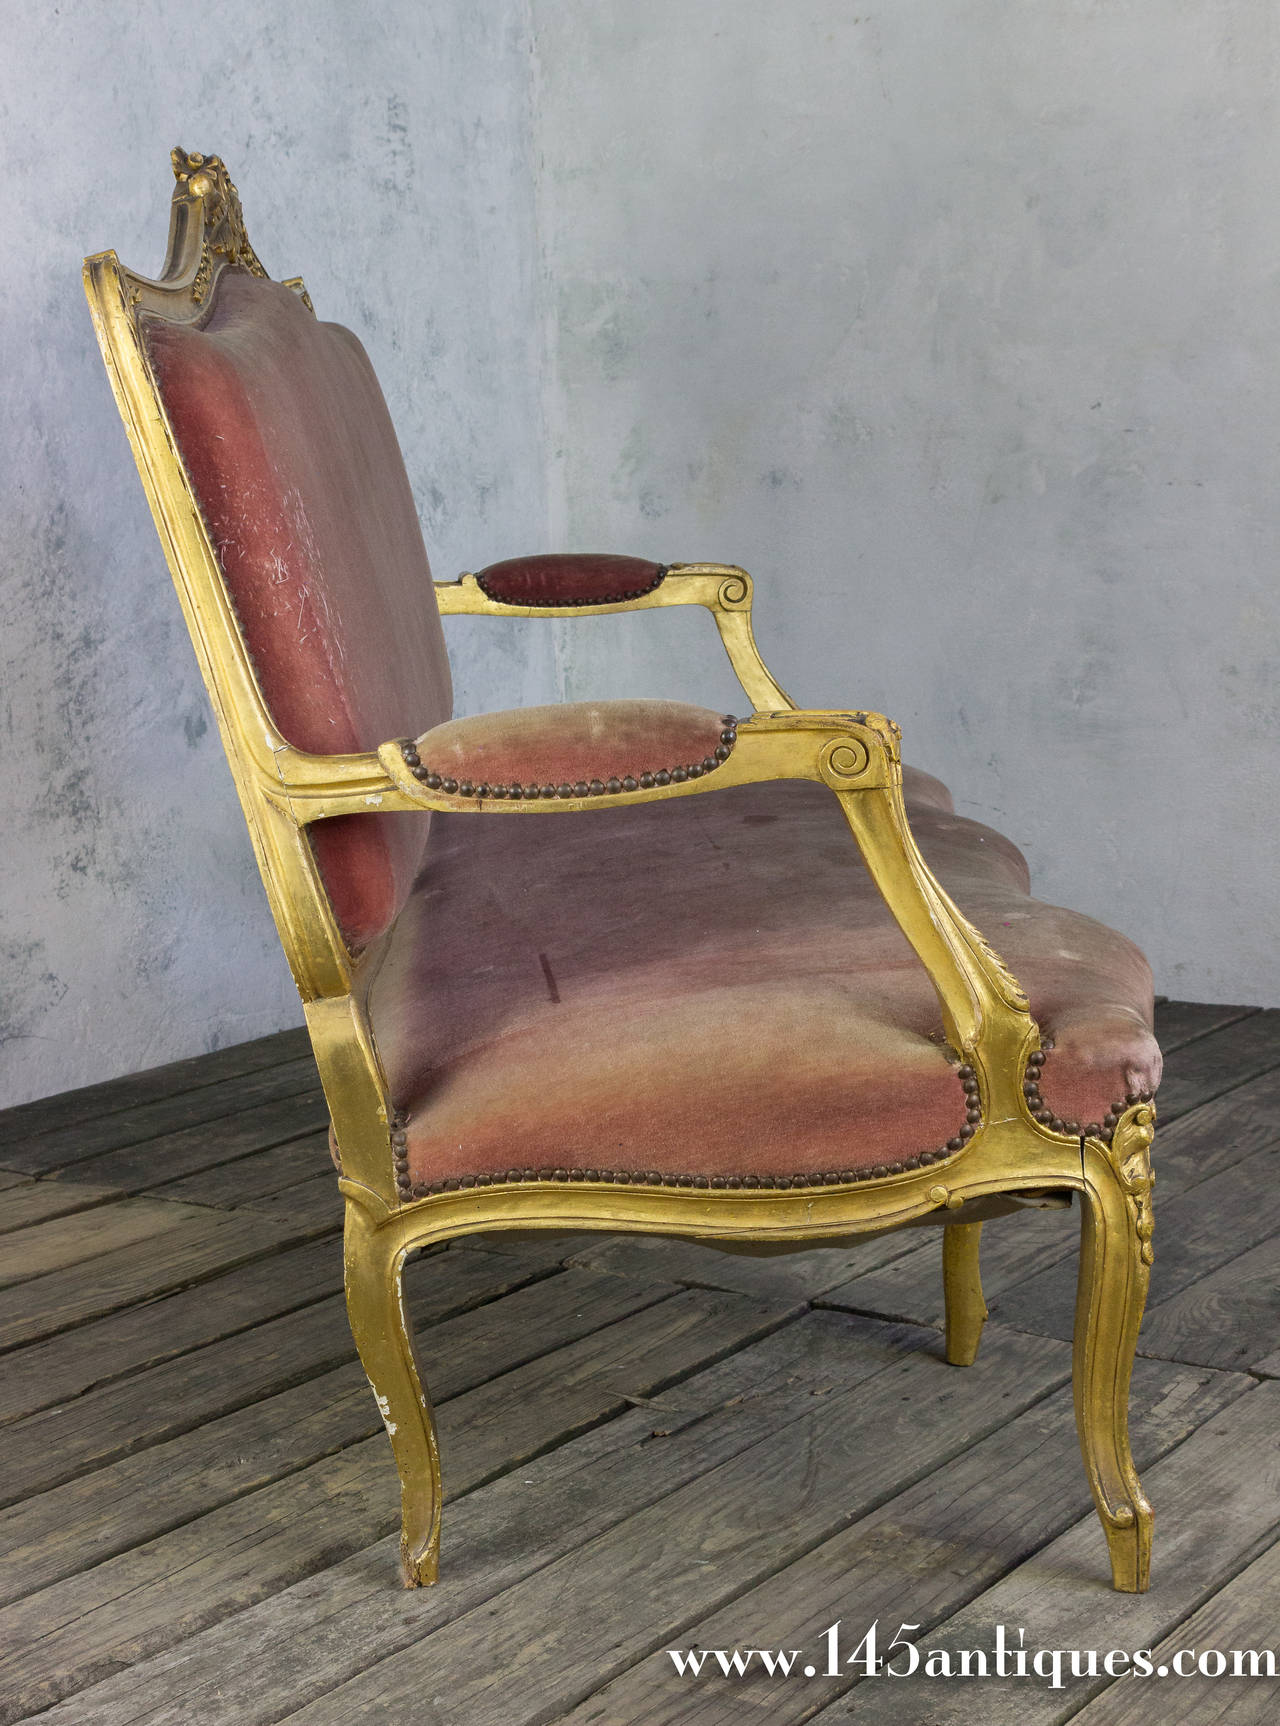 Early 20th Century French Louis XV Style Gilt Settee in Faded Salmon Velvet